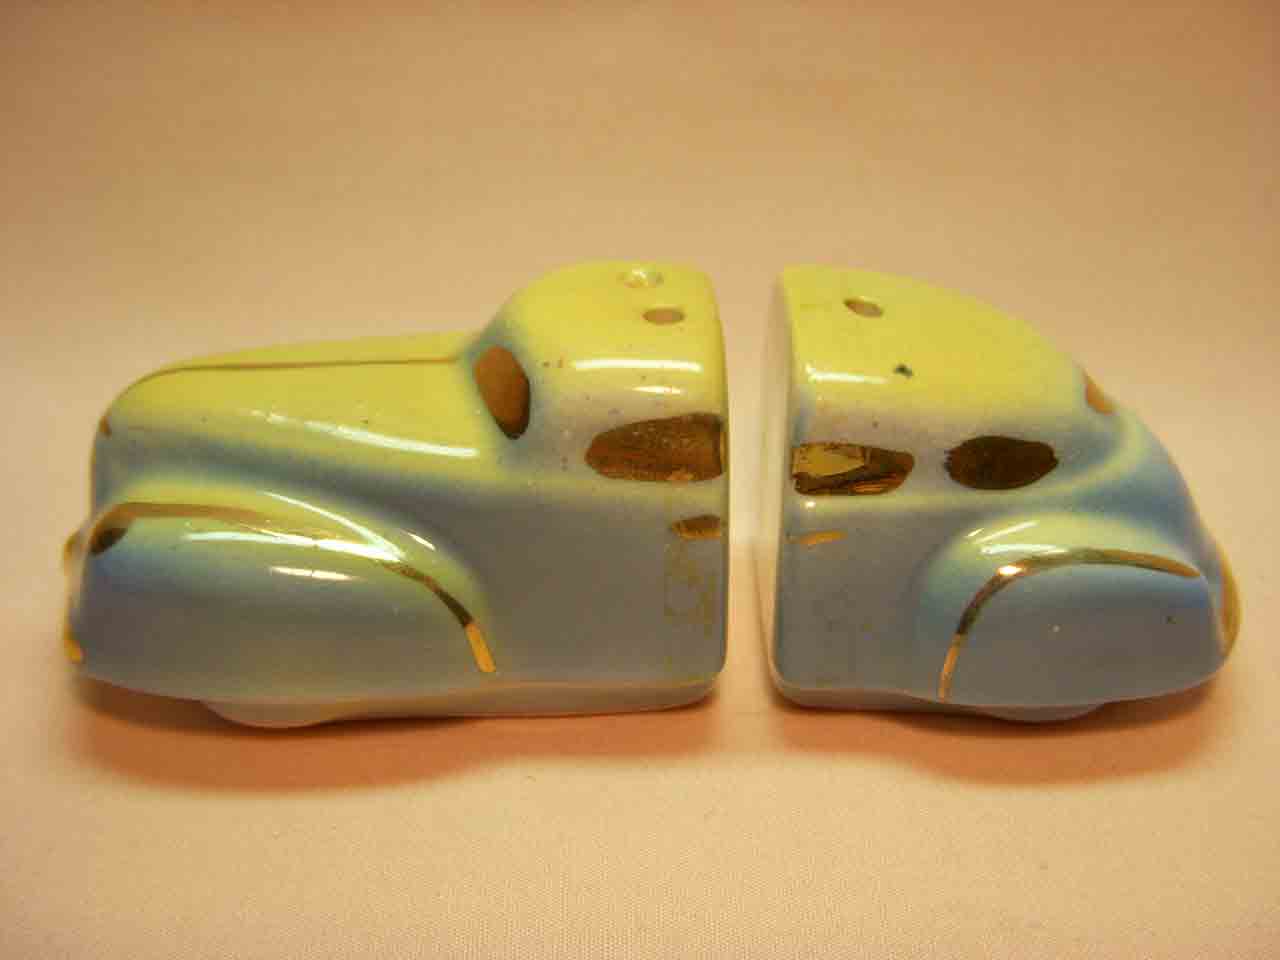 Go with car salt and pepper shakers